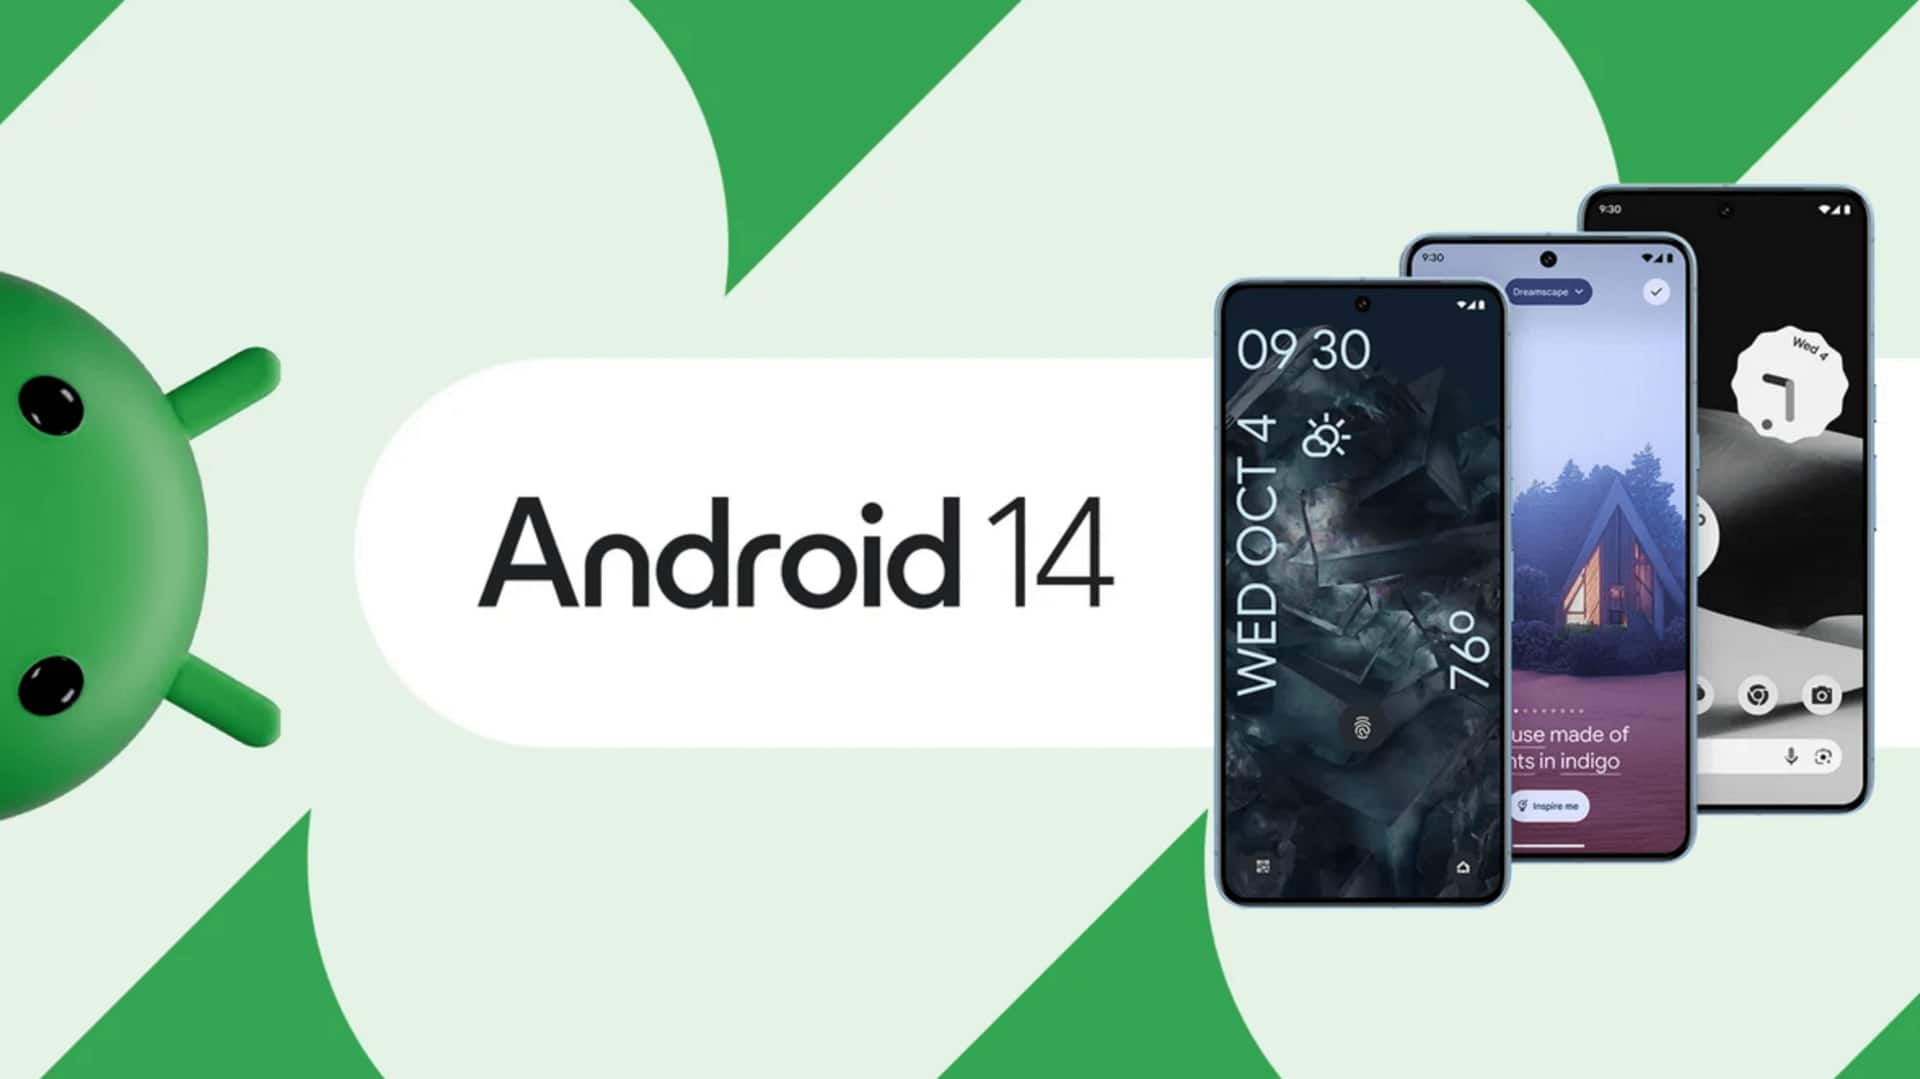 Here's when your smartphone will get Android 14 OS